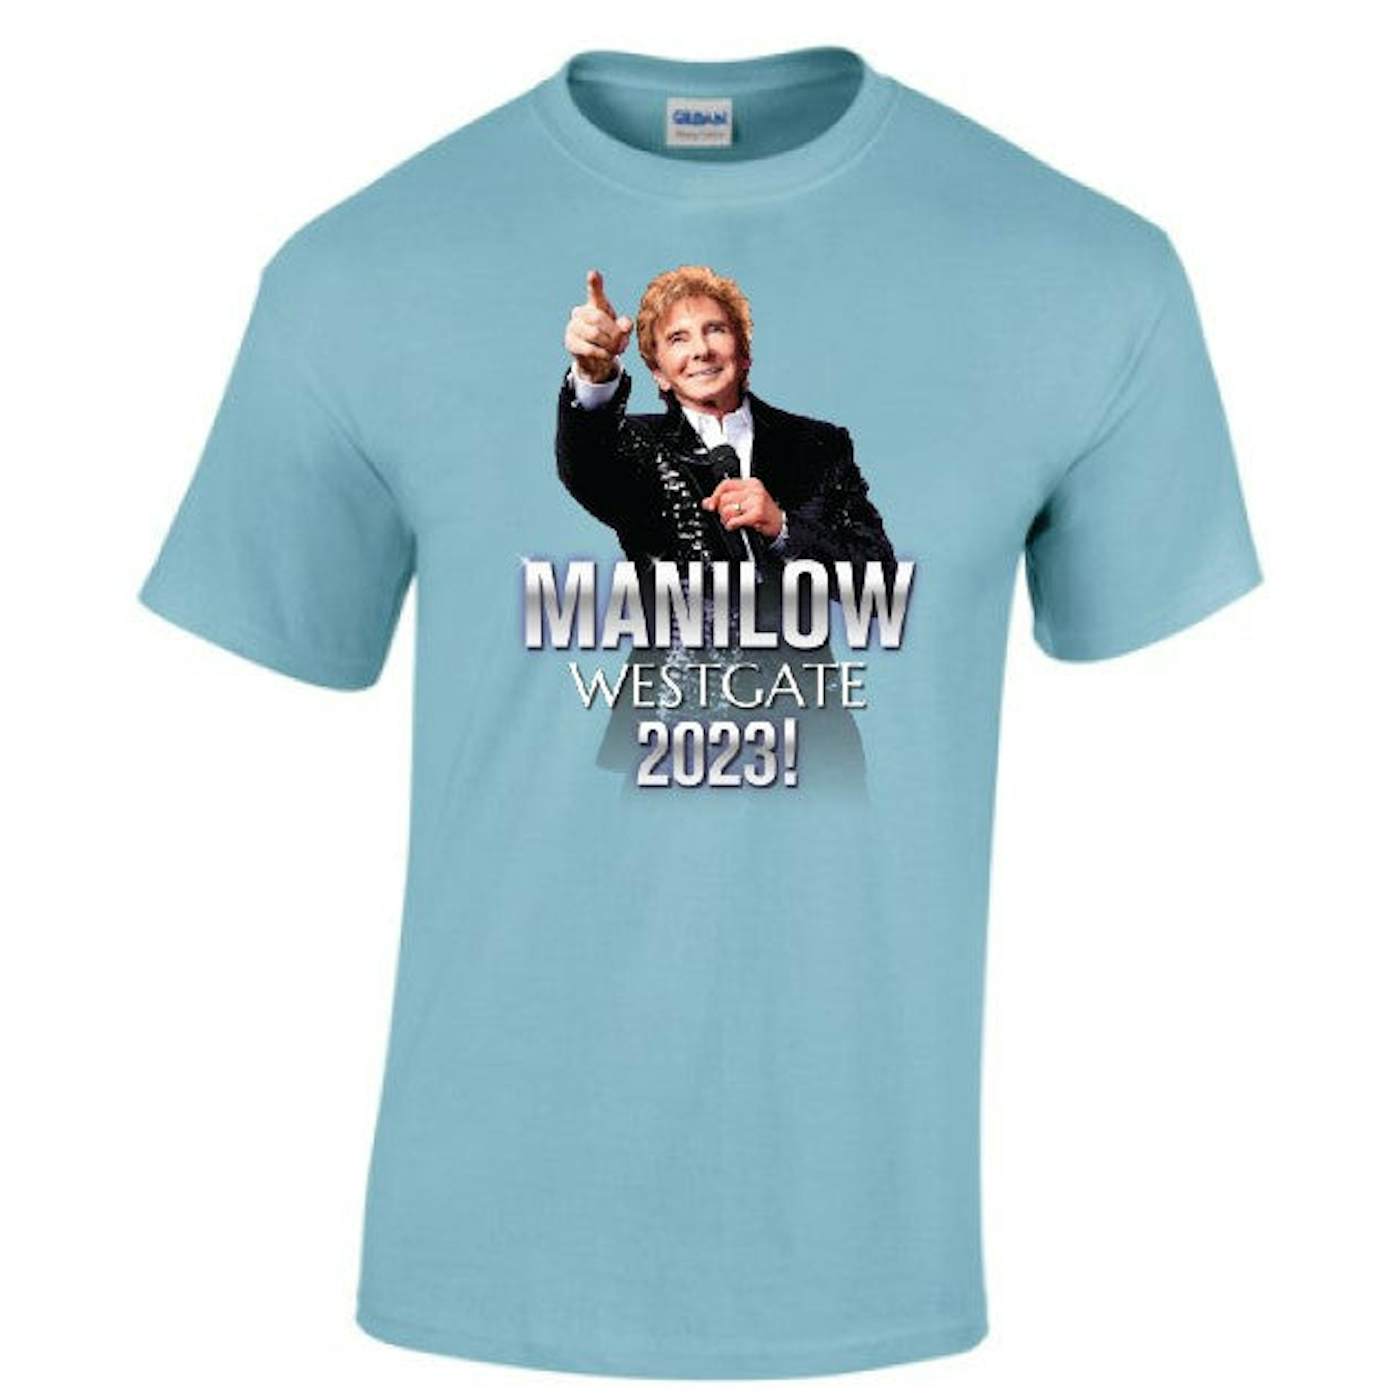 Barry Manilow Manilow Westgate 2023! Shirts